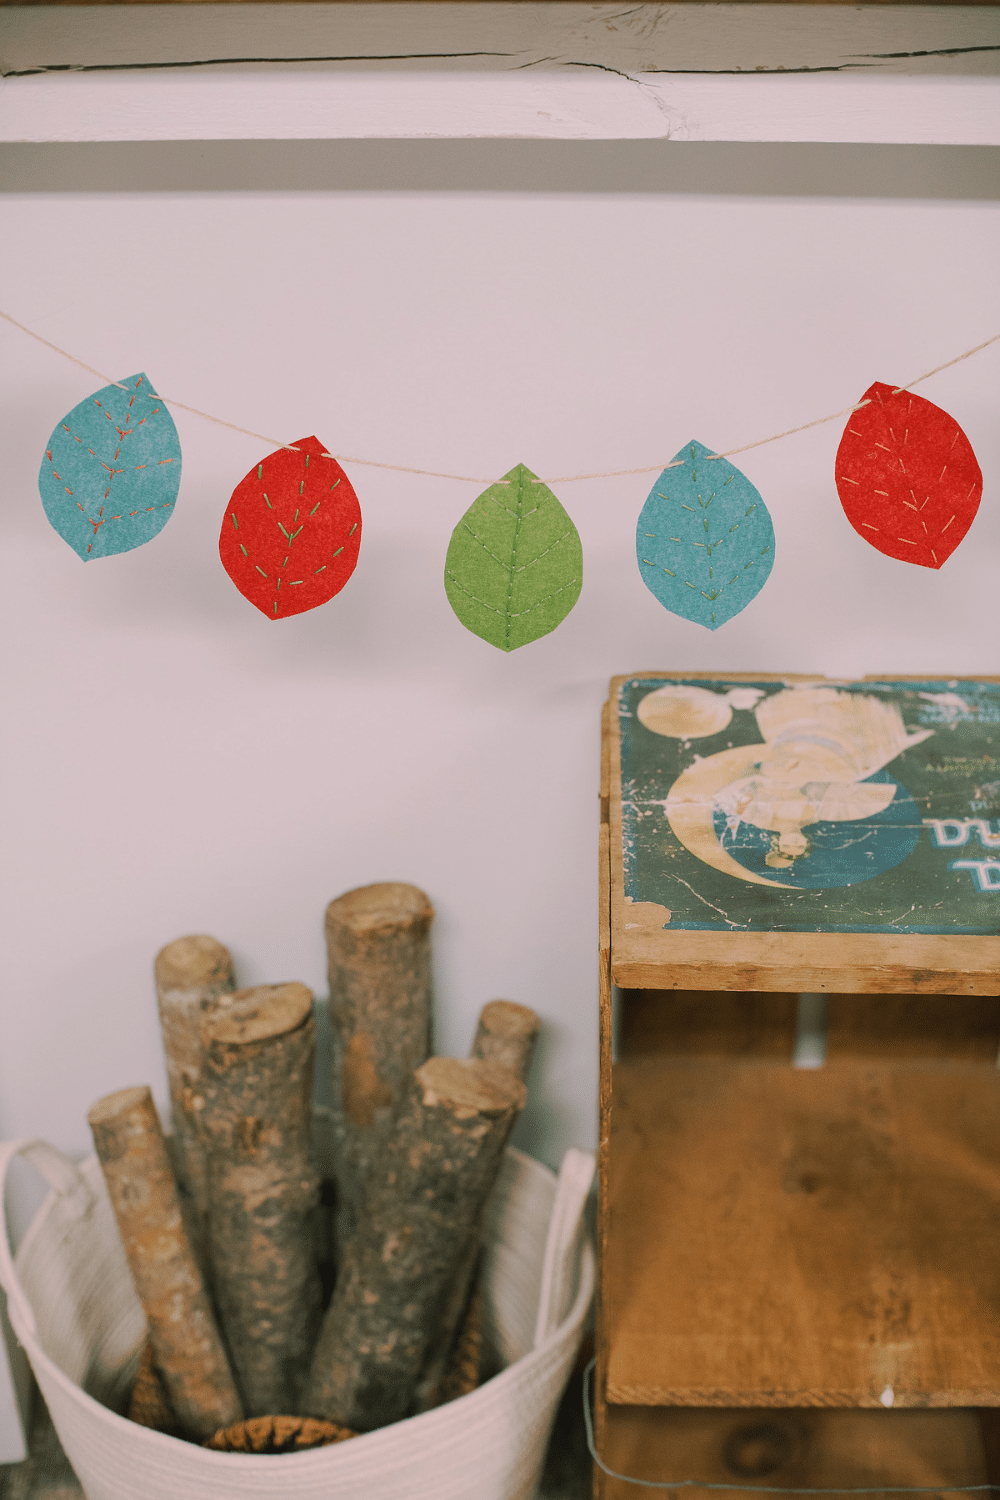 How to Make an Embroidered Felt Leaf Garland